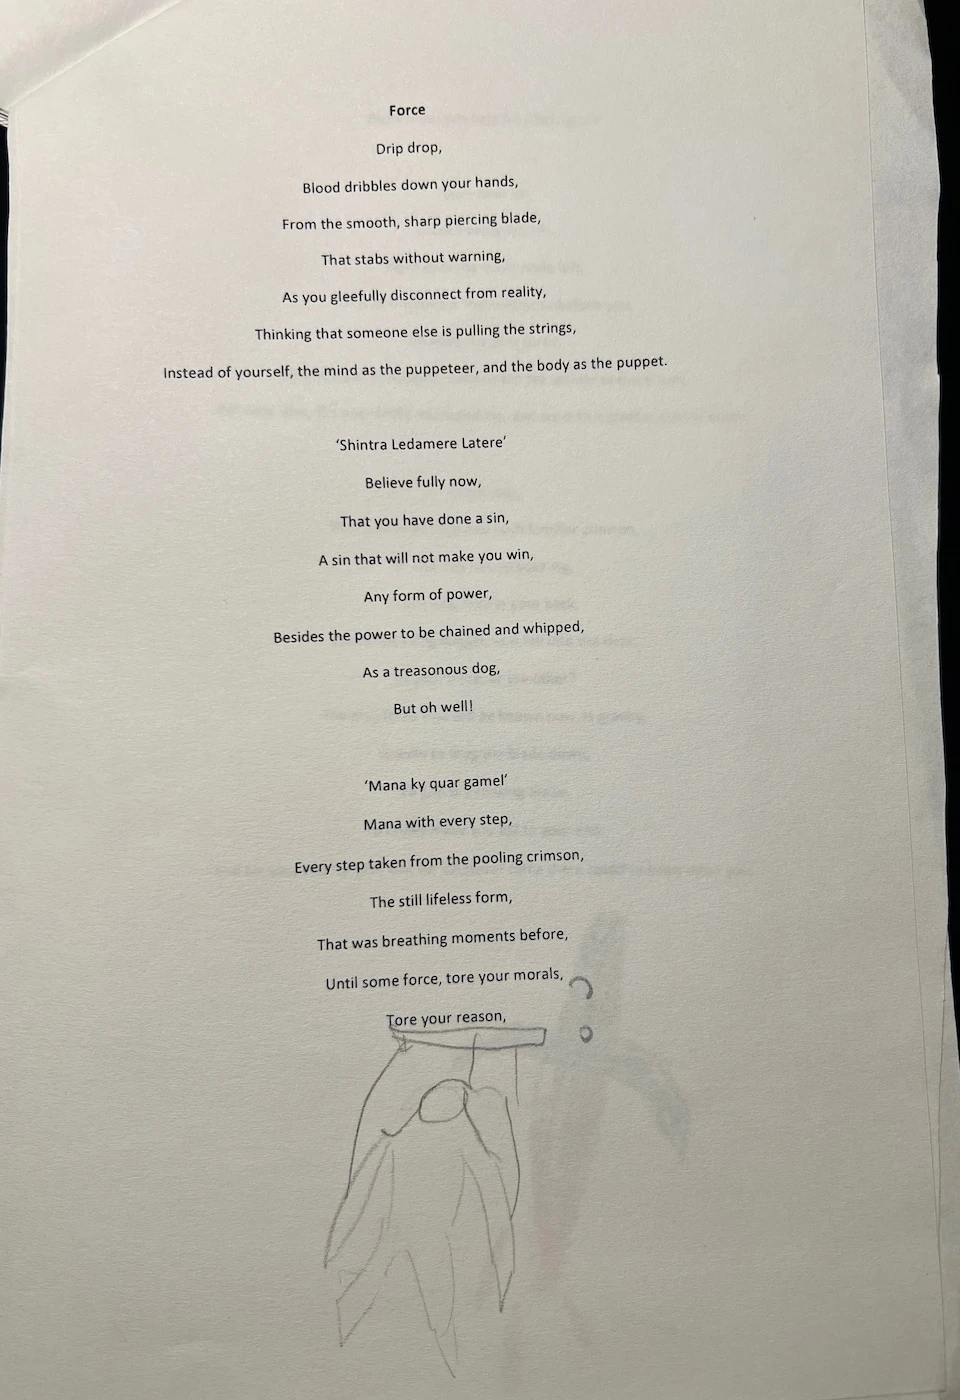 Image of the force poem (pg. 1) as part of a schoolwork poetry book